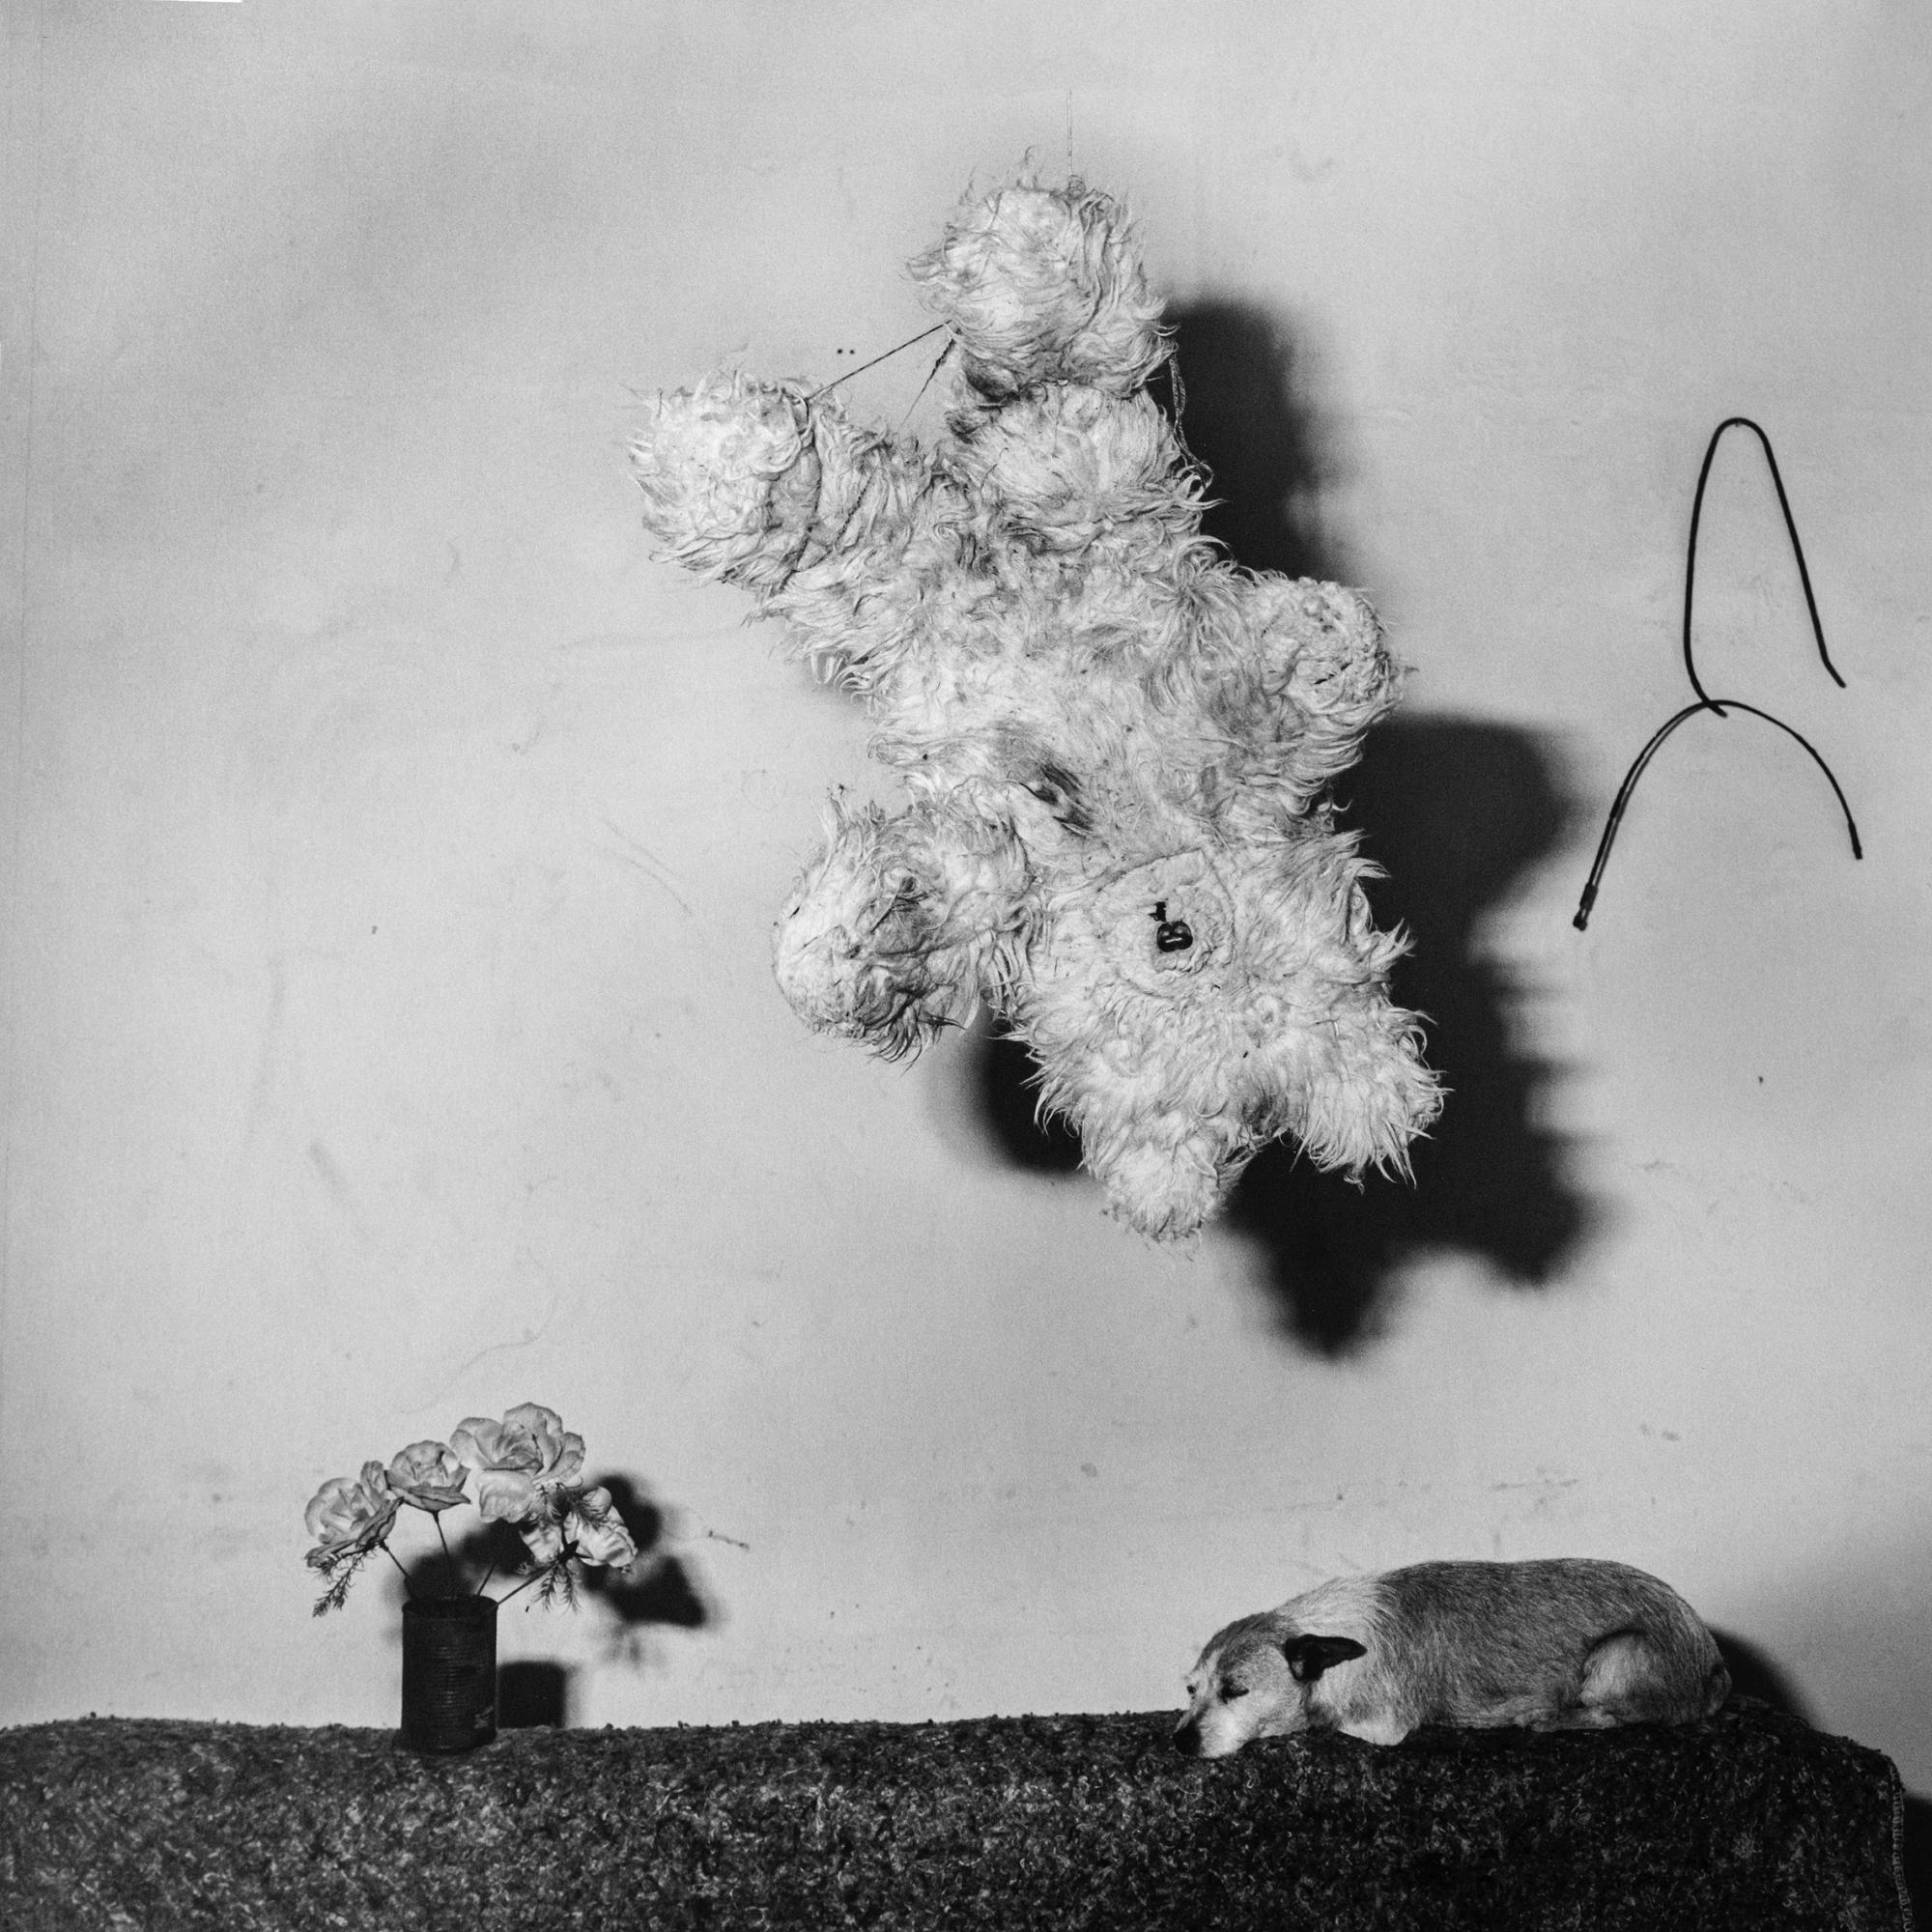 Unexpected – Roger Ballen, Black and White, Staged, Vintage Photography, Dog